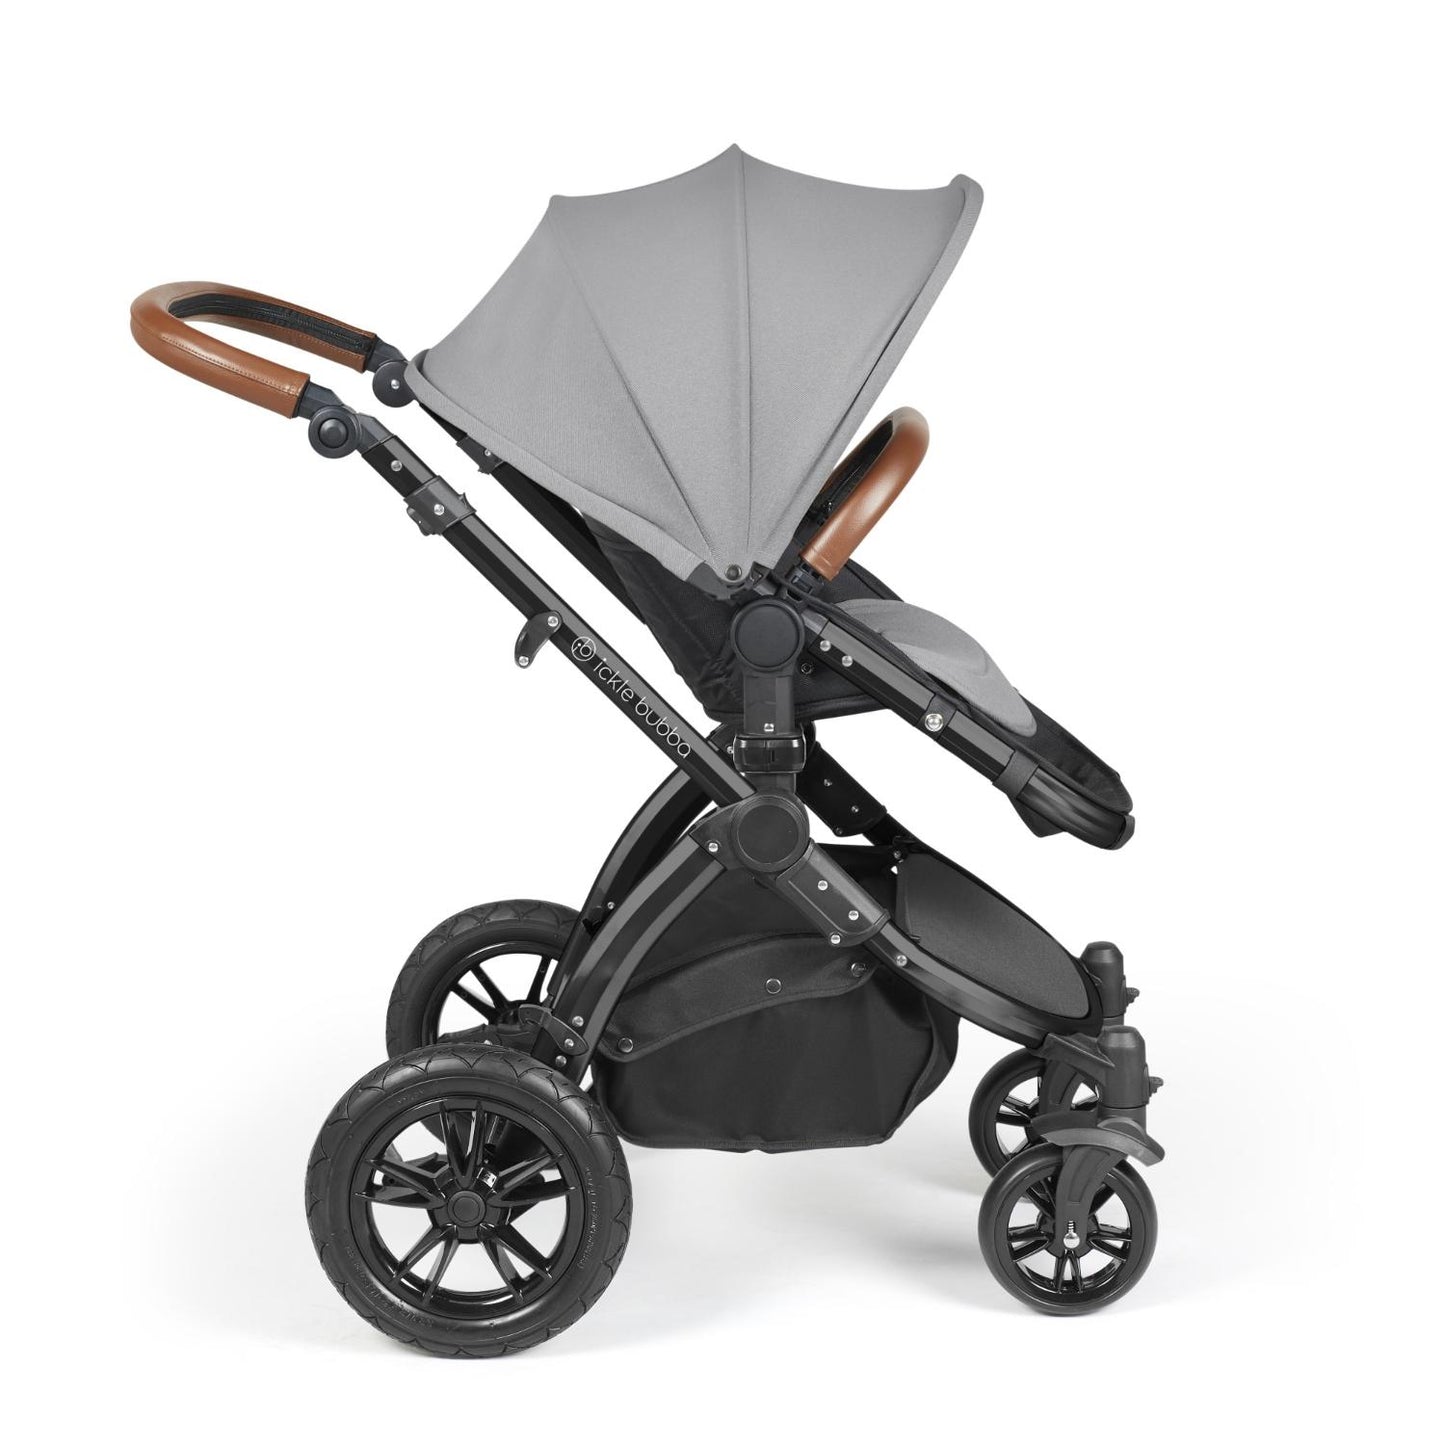 Side view of Ickle Bubba Stomp Luxe Pushchair with seat unit attached in Pearl Grey colour with tan handle